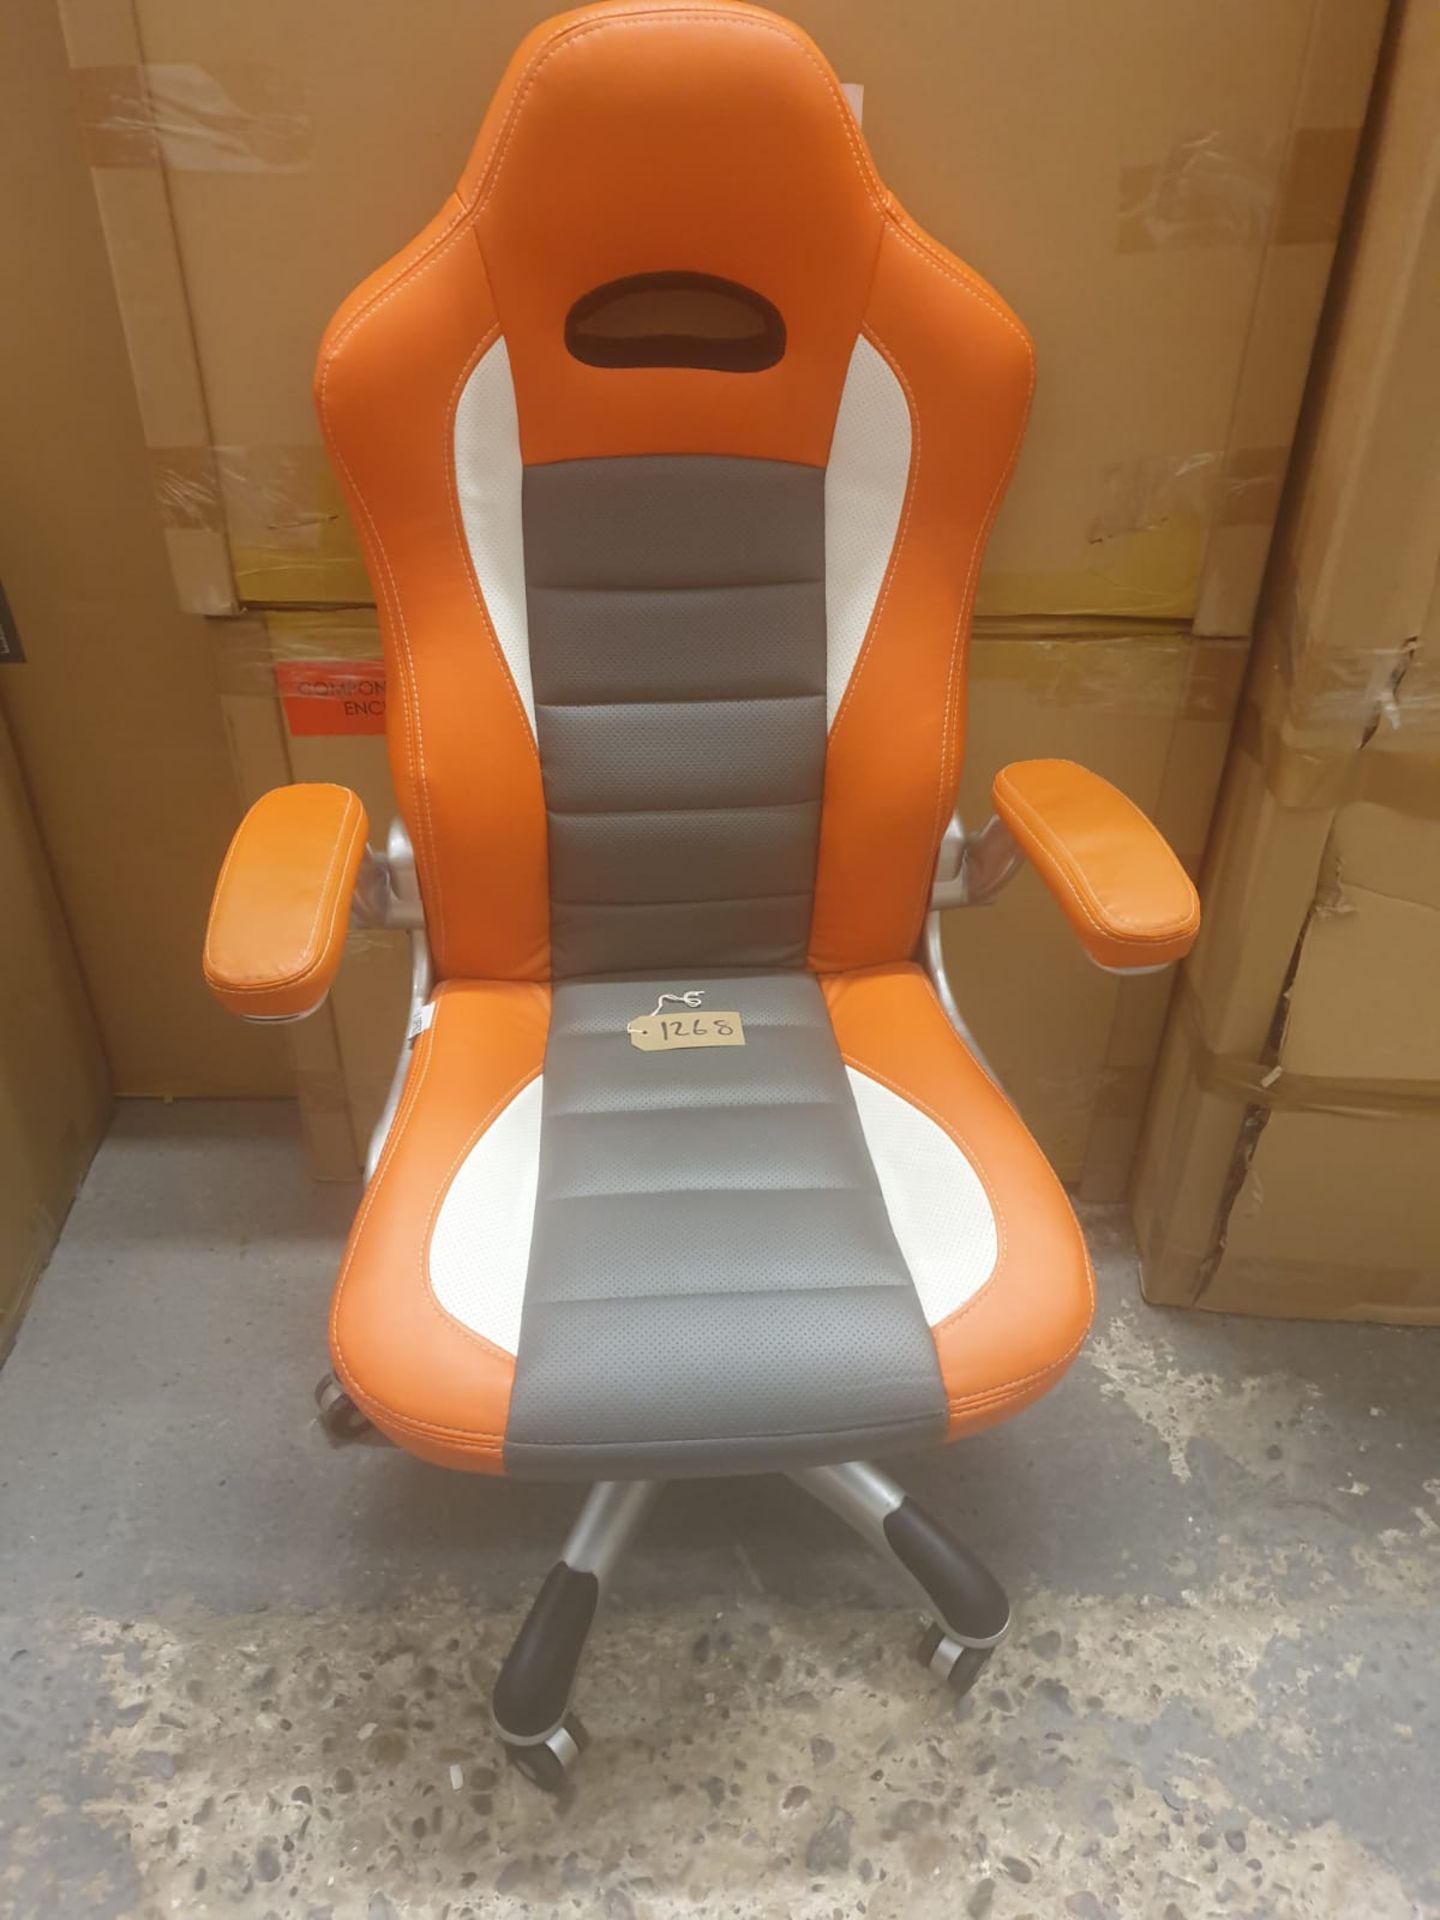 HJH Office, 621700, Gaming Chair, Home Office Chair, Racer Sport, Orange, Faux Leather, High Back